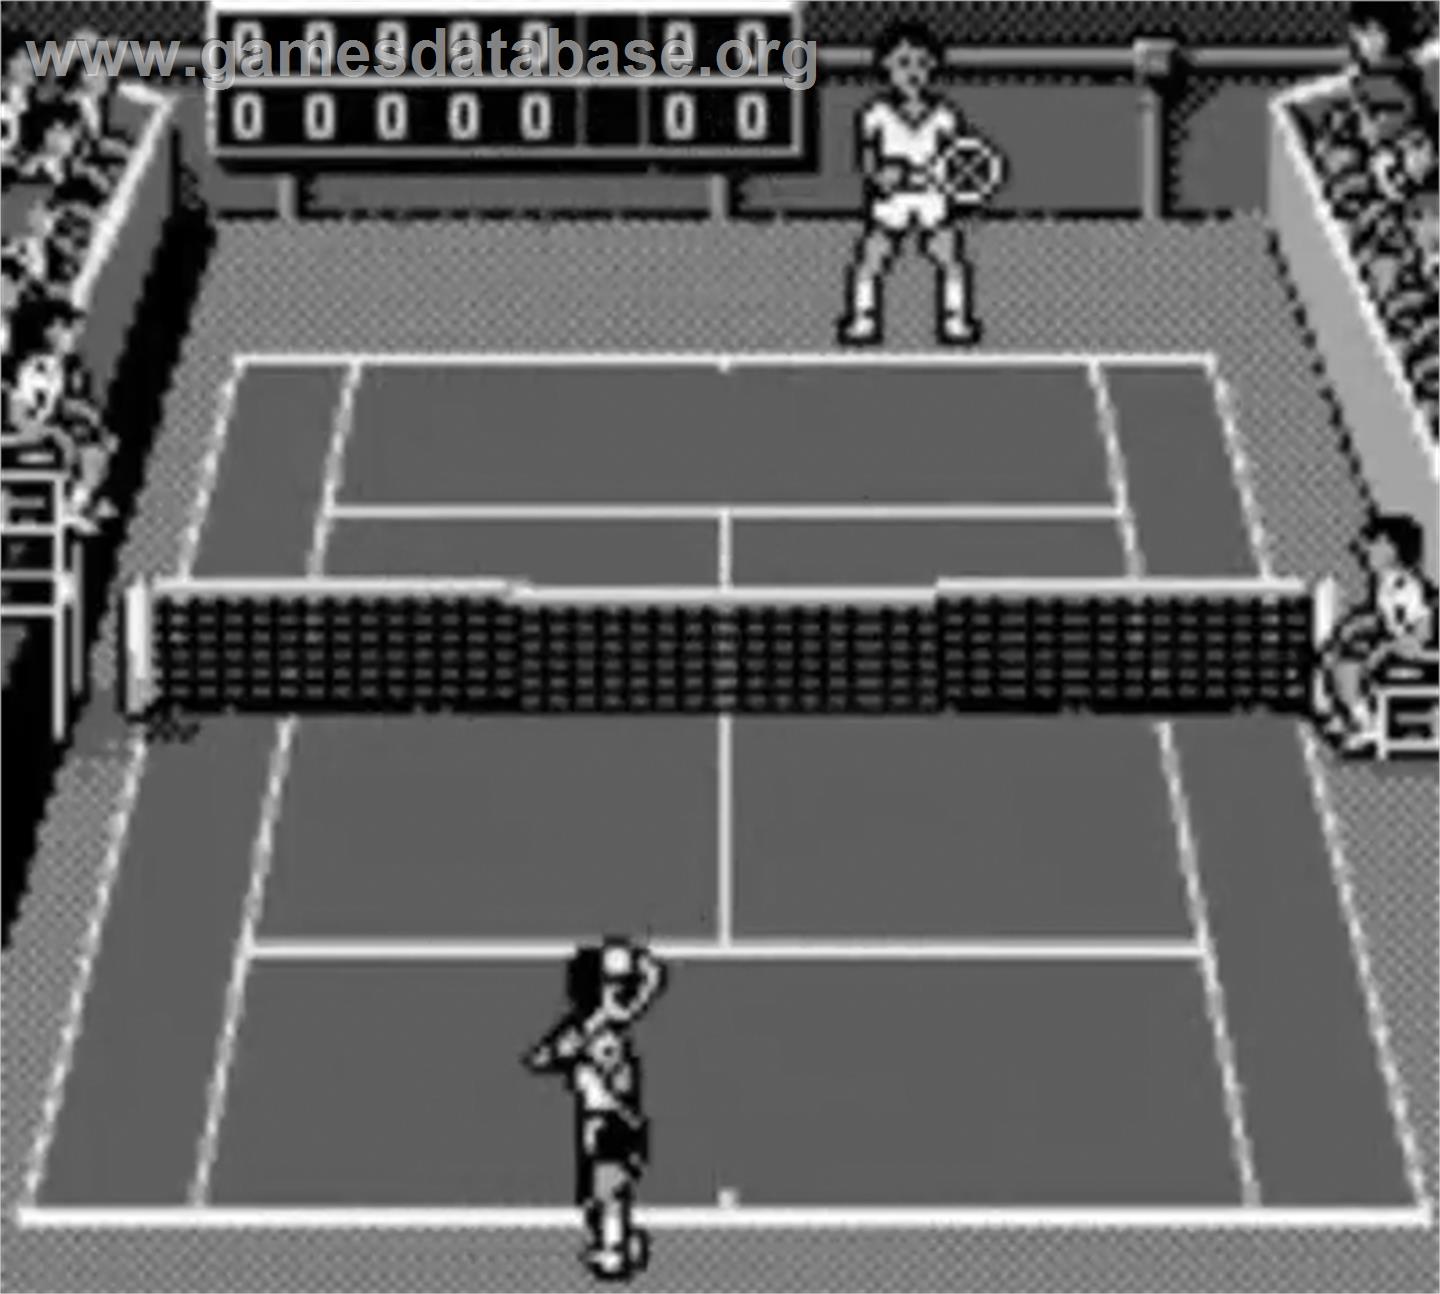 Jimmy Connors Tennis - Nintendo Game Boy - Artwork - In Game